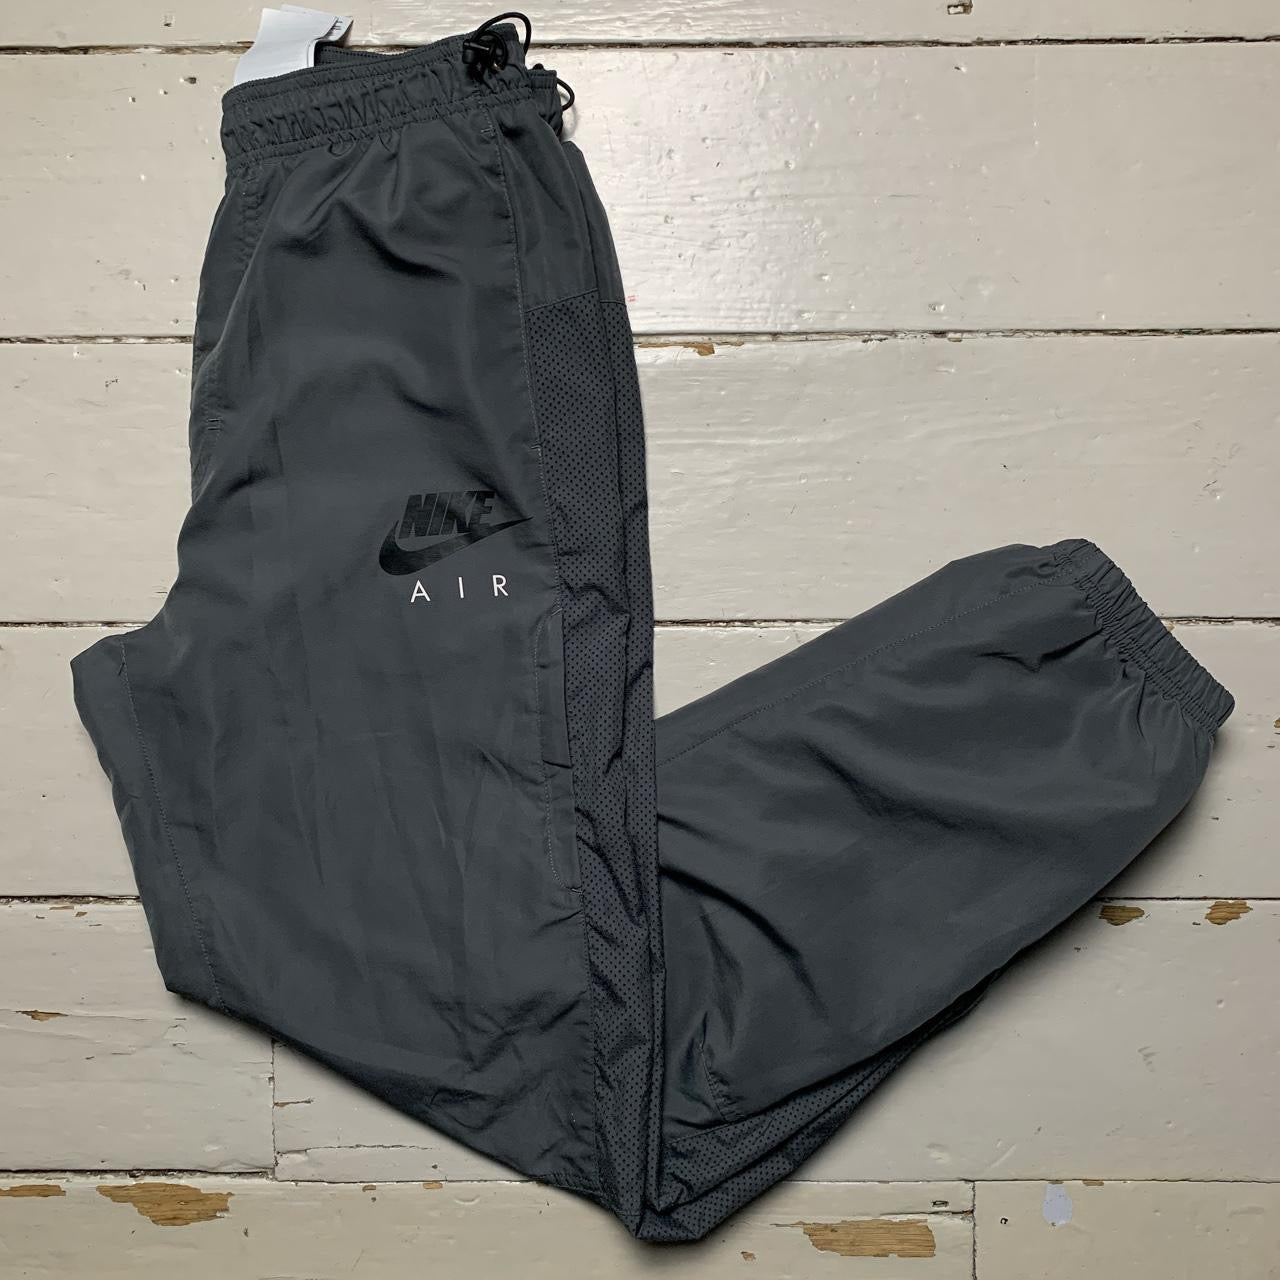 Nike Air Shell Baggy Bottoms (Small)